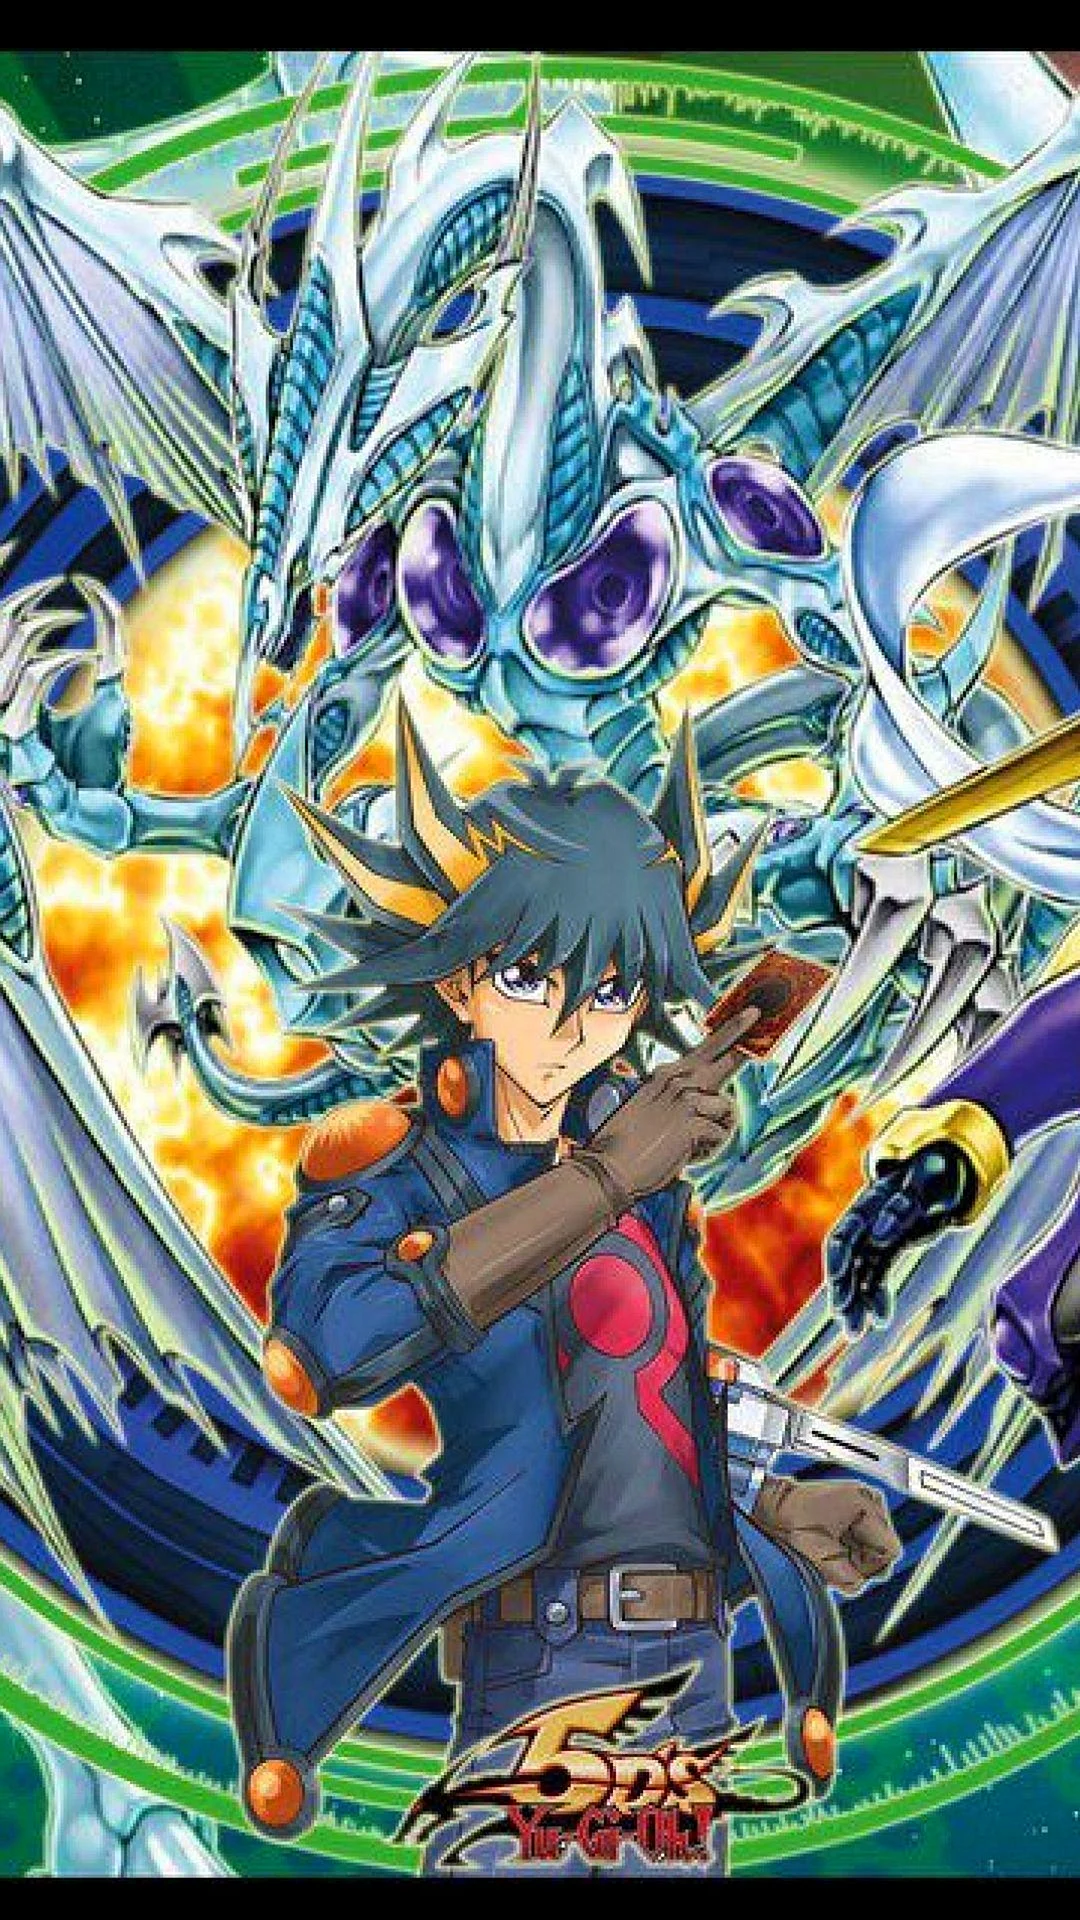 Yu-Gi-Oh 5ds Wallpaper For iPhone